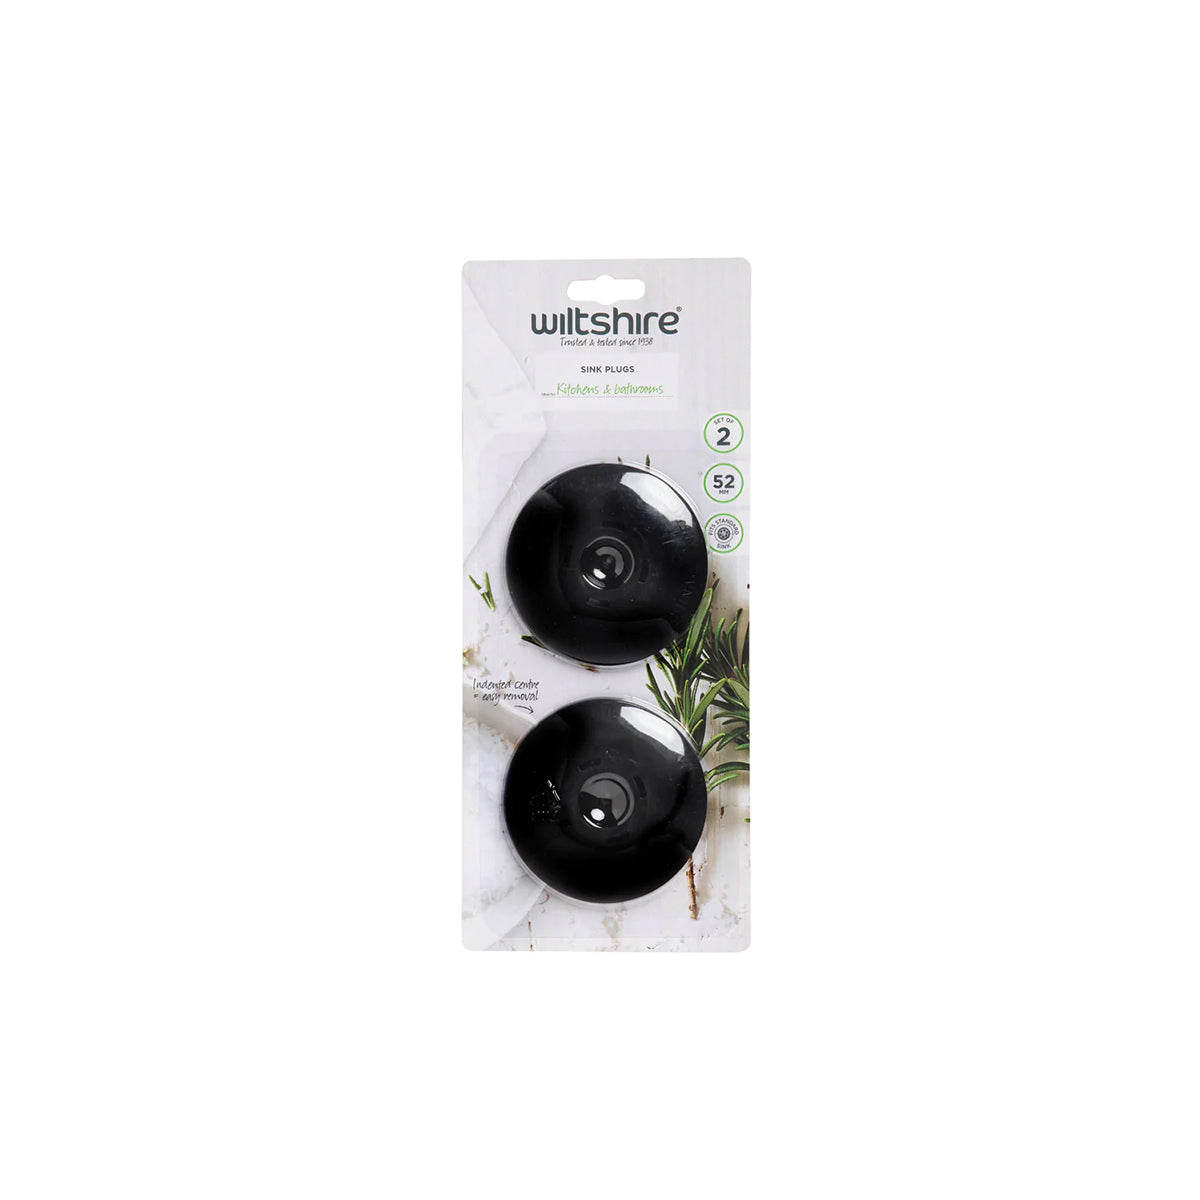 WLT43212 Wiltshire Sink Plug Pack Of 2 Tomkin Australia Hospitality Supplies